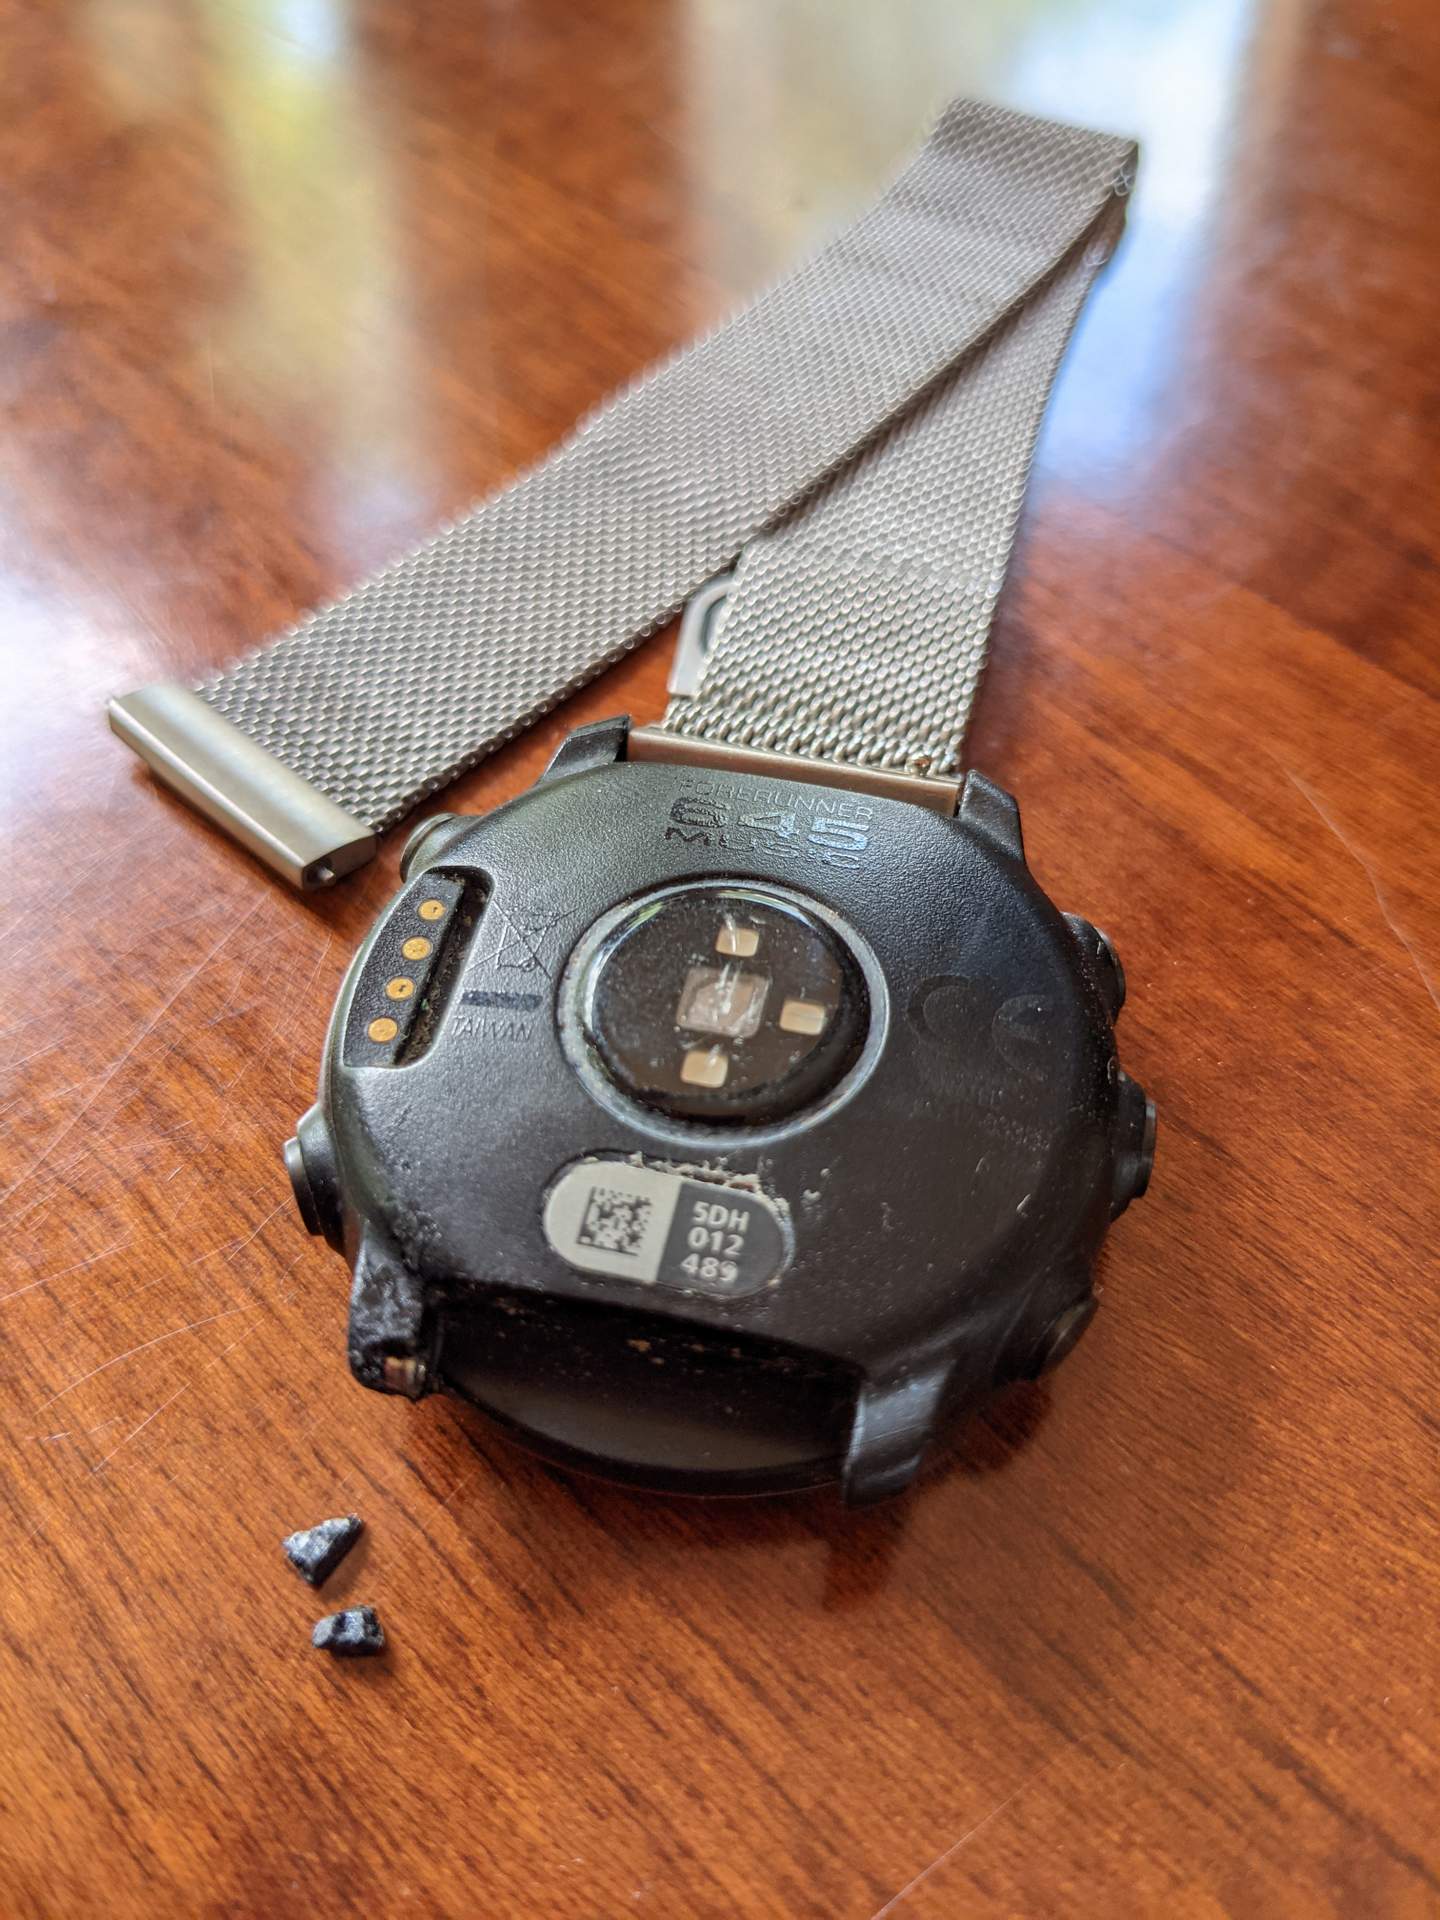 A not-uncommon problem with Garmin watches is the watch pin supports (what I call "ears") breaking. The watchband pulls out of the watch. Here, I had re-inserted and Super Glued the watch pin "collar" into the watch.